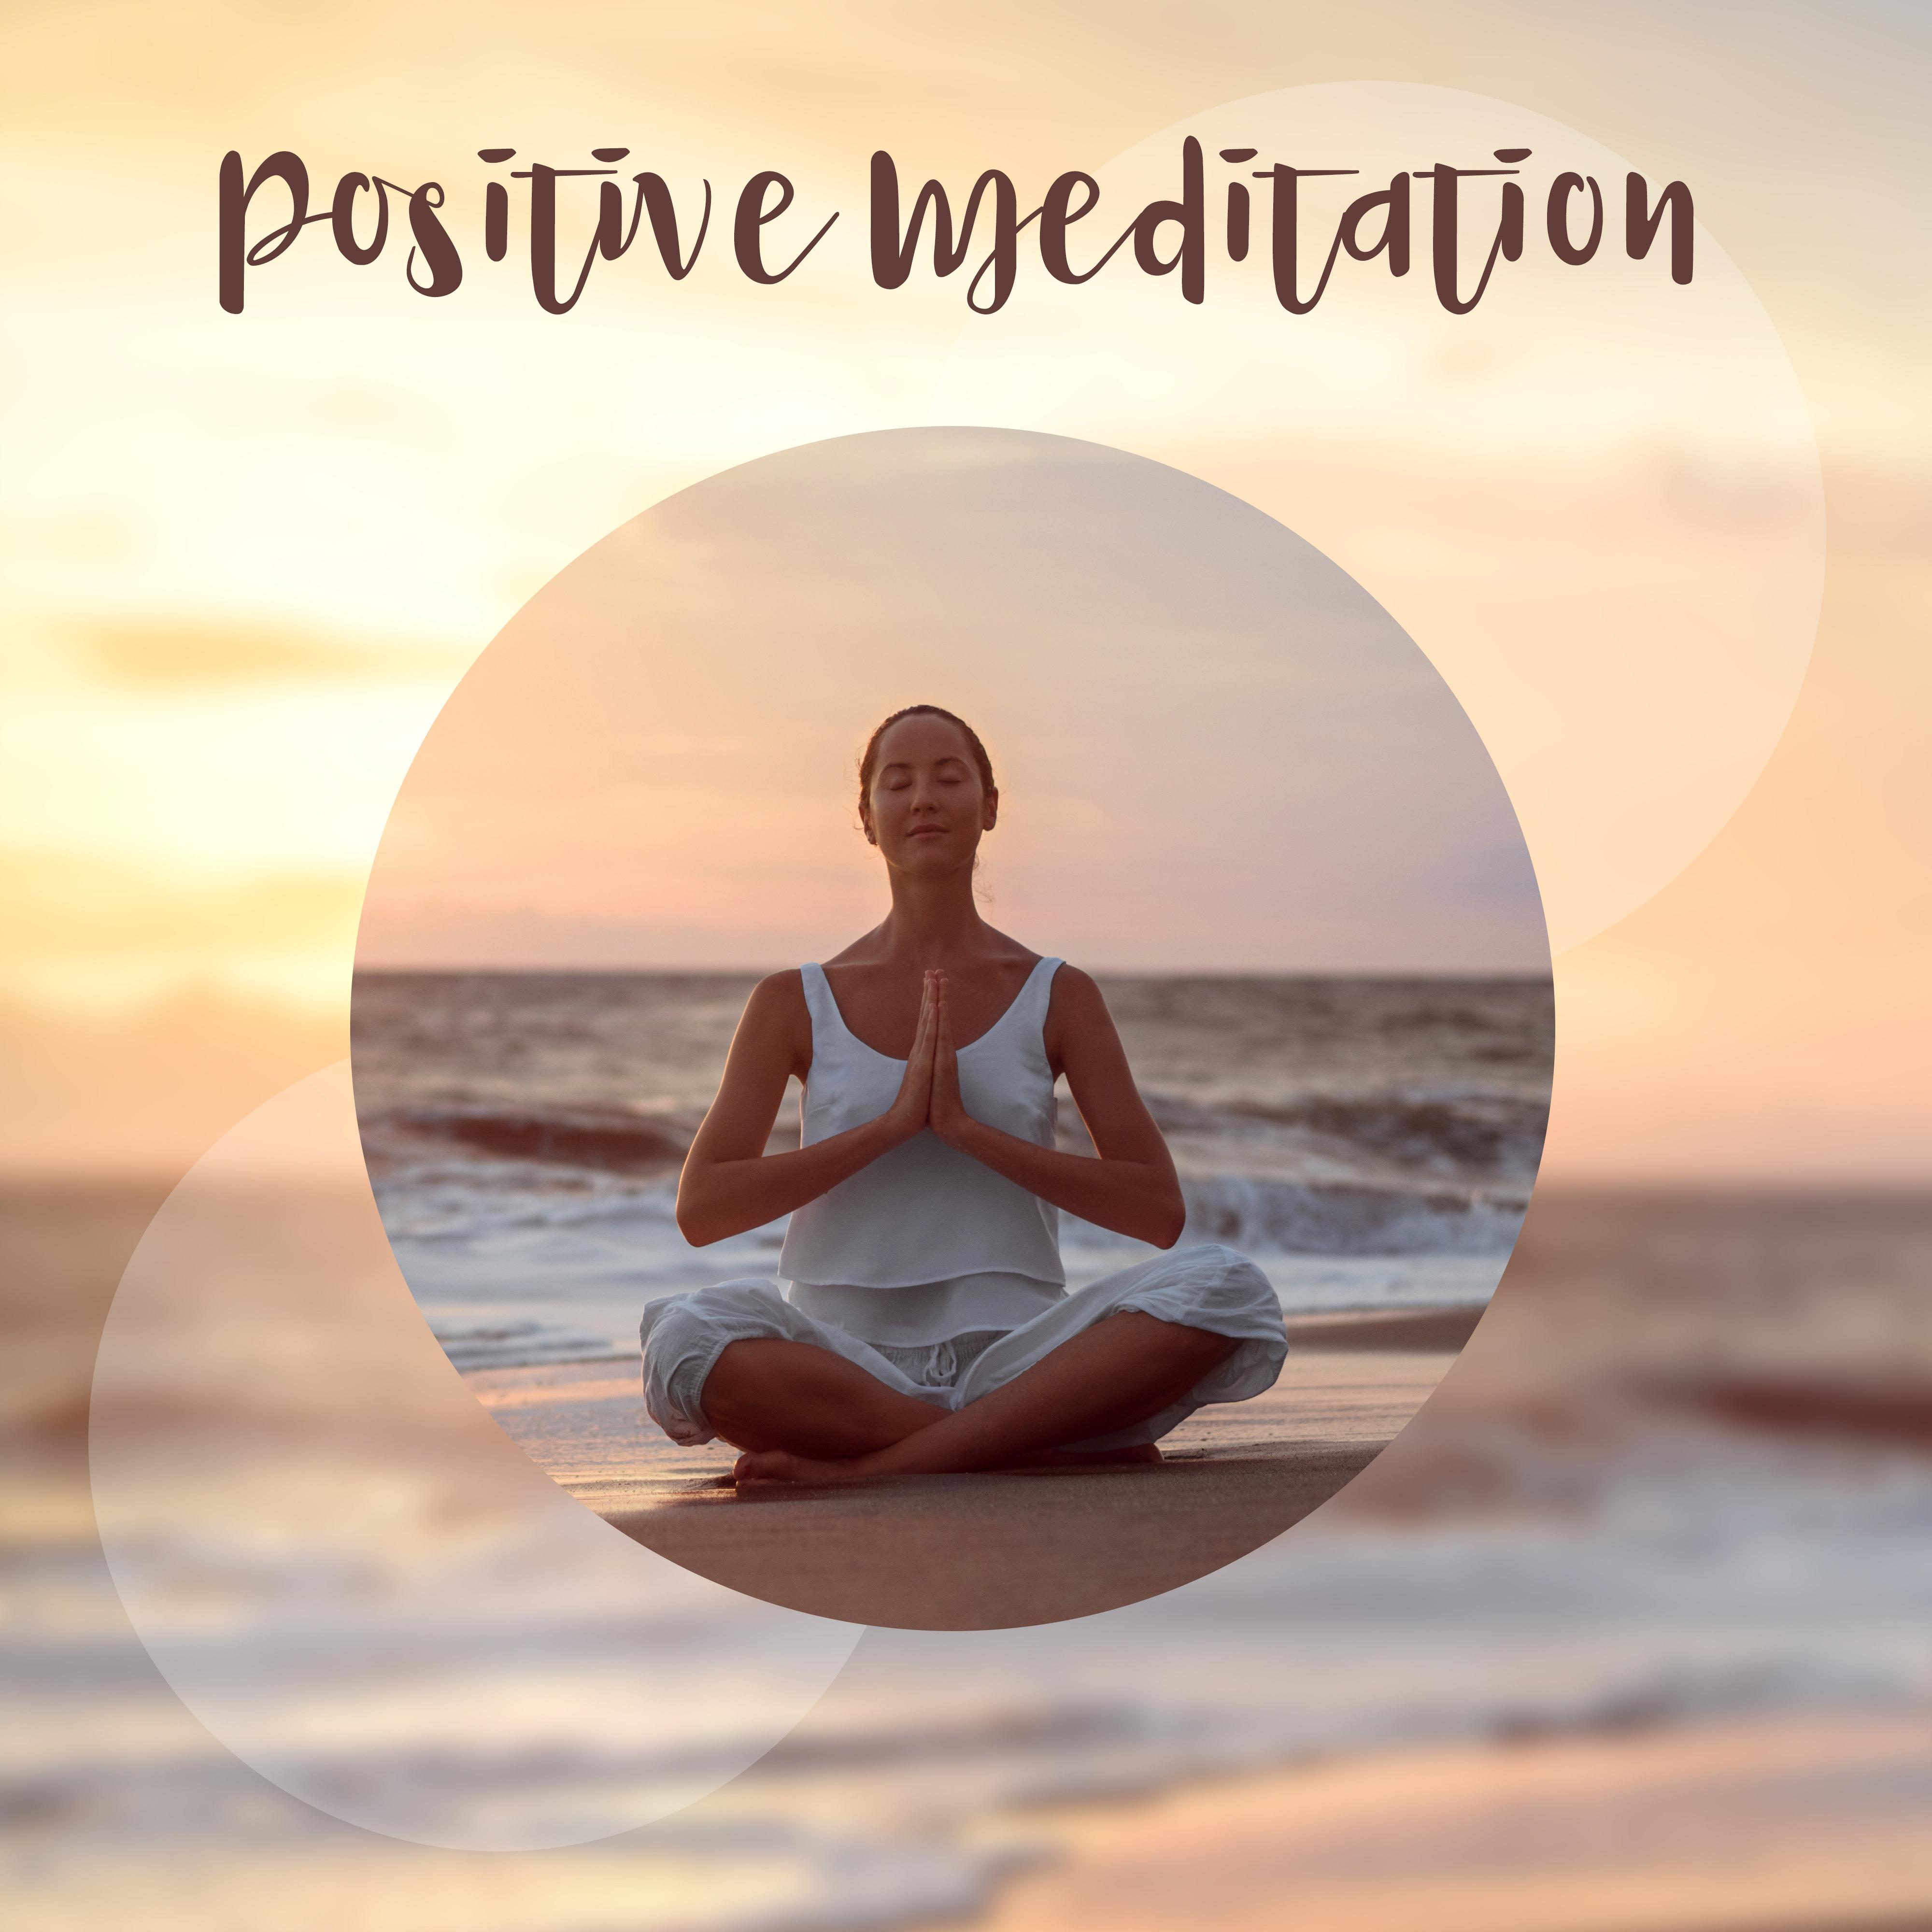 Positive Meditation  Good Thoughts, Good Mood, Energy, Happiness and Inner Harmony